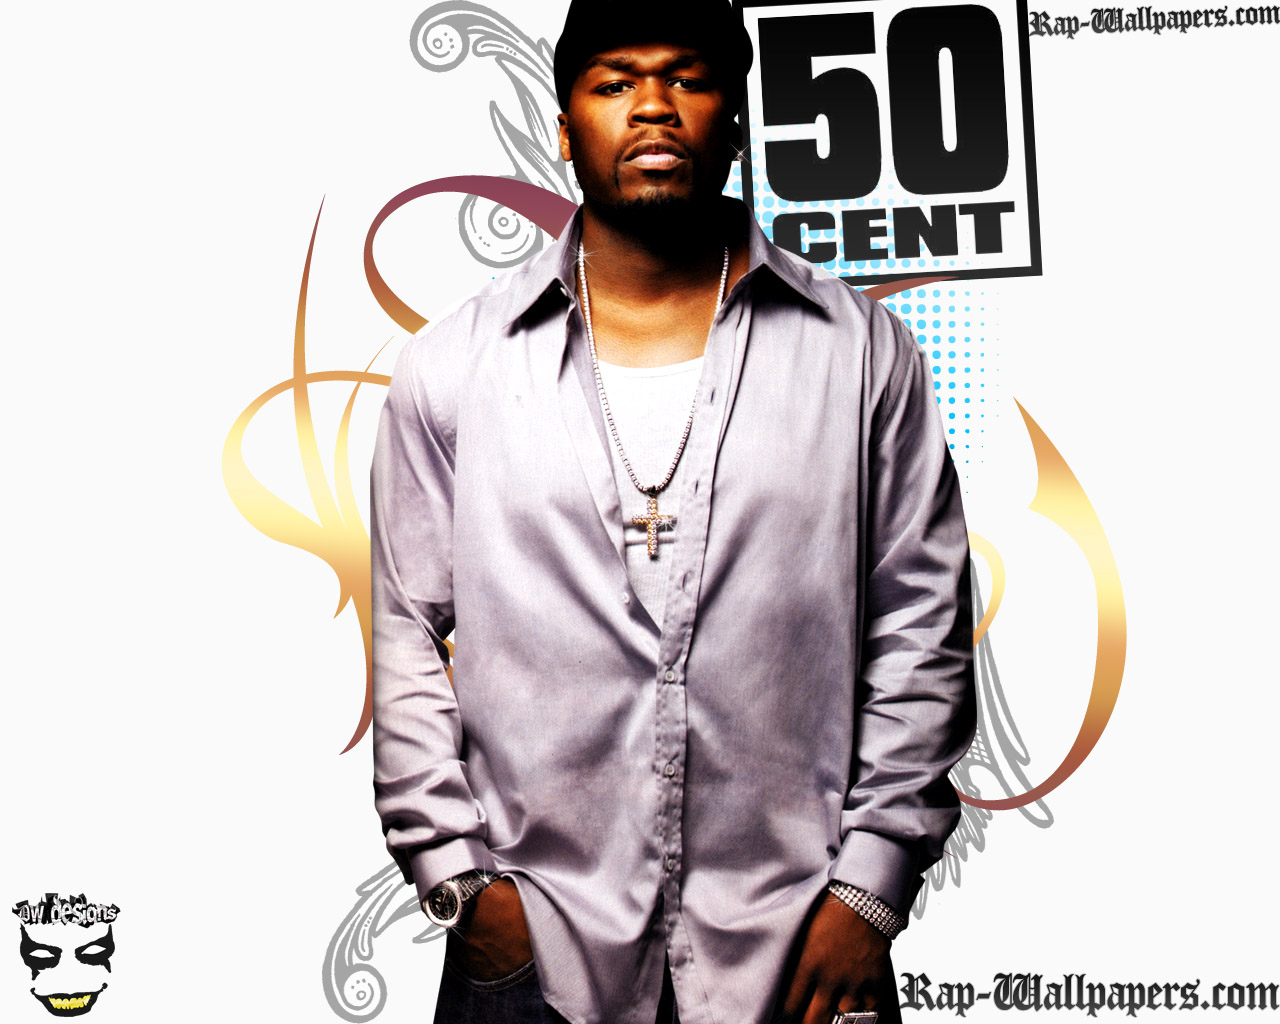 Another 50 Cent Wallpaper